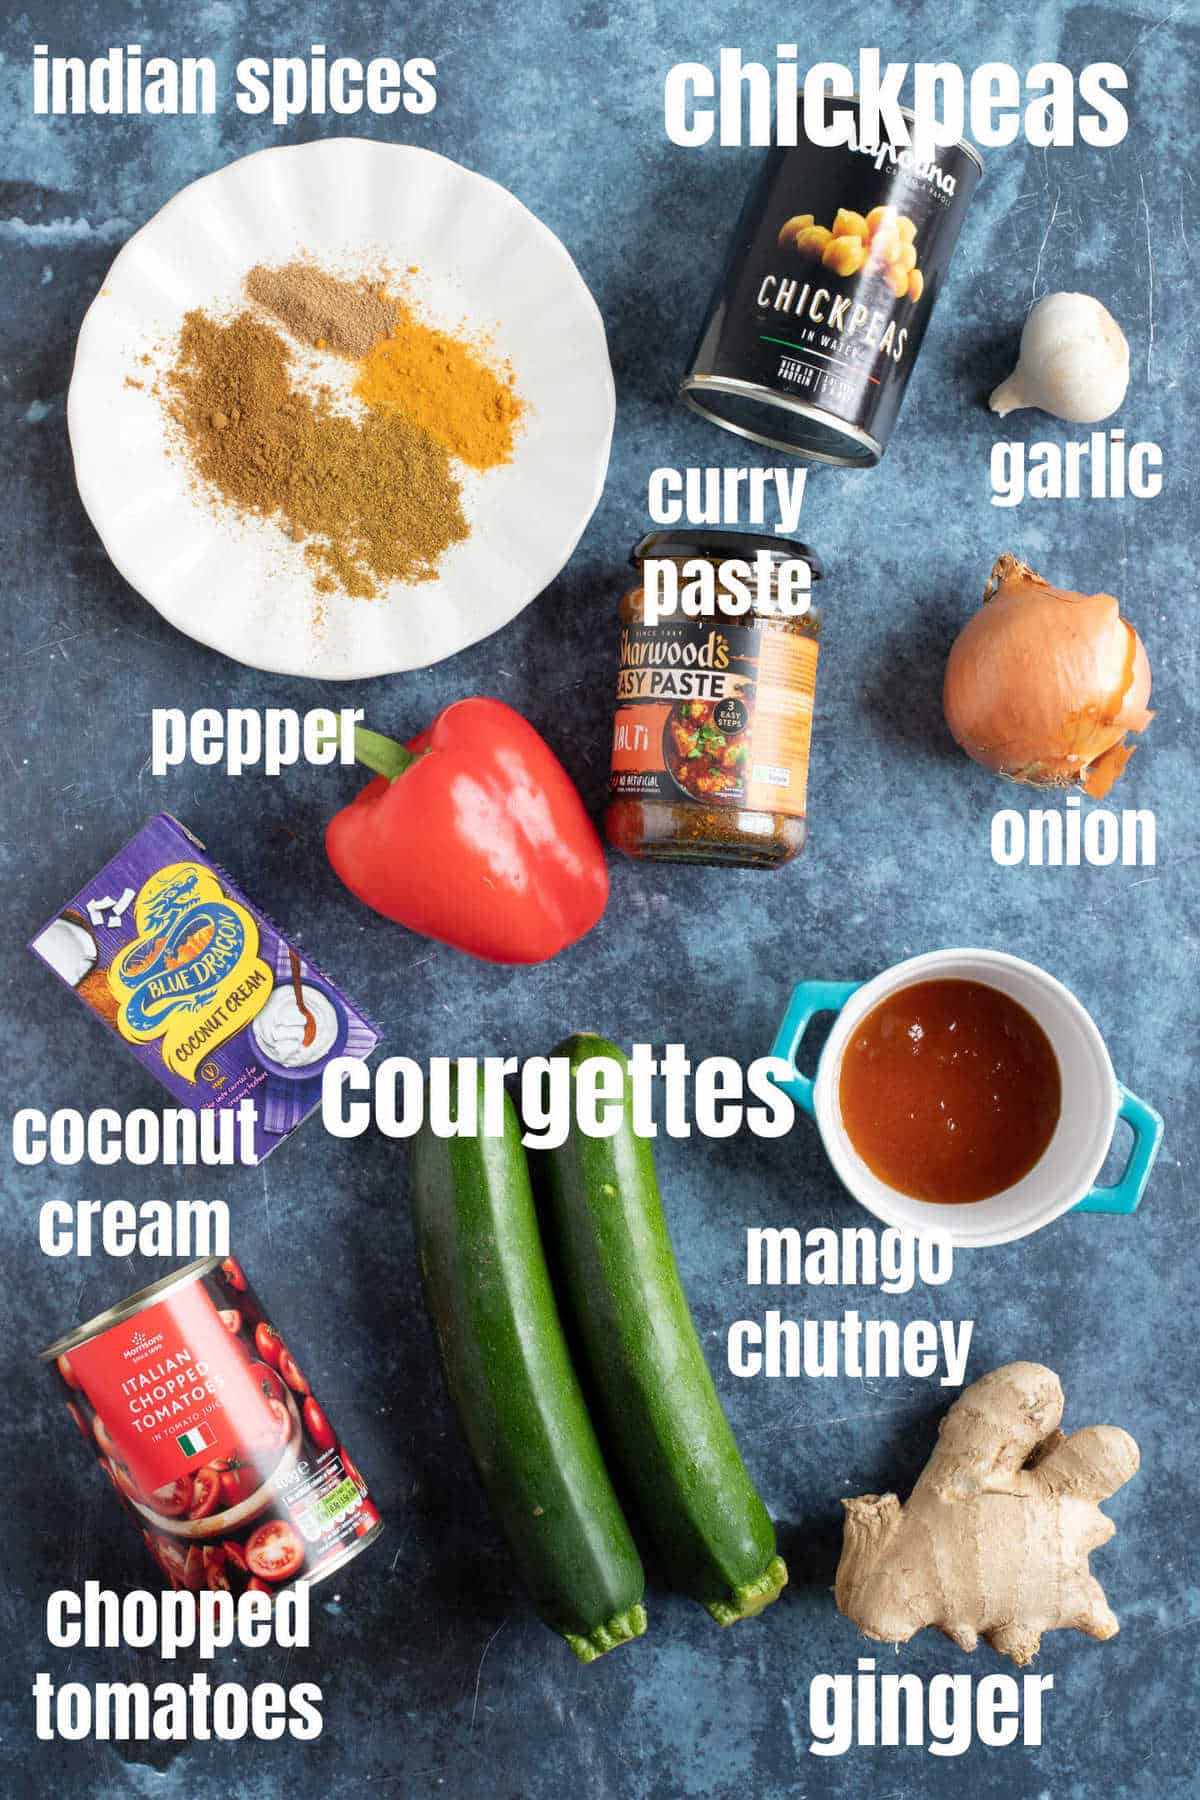 Ingredients needed for courgette curry.